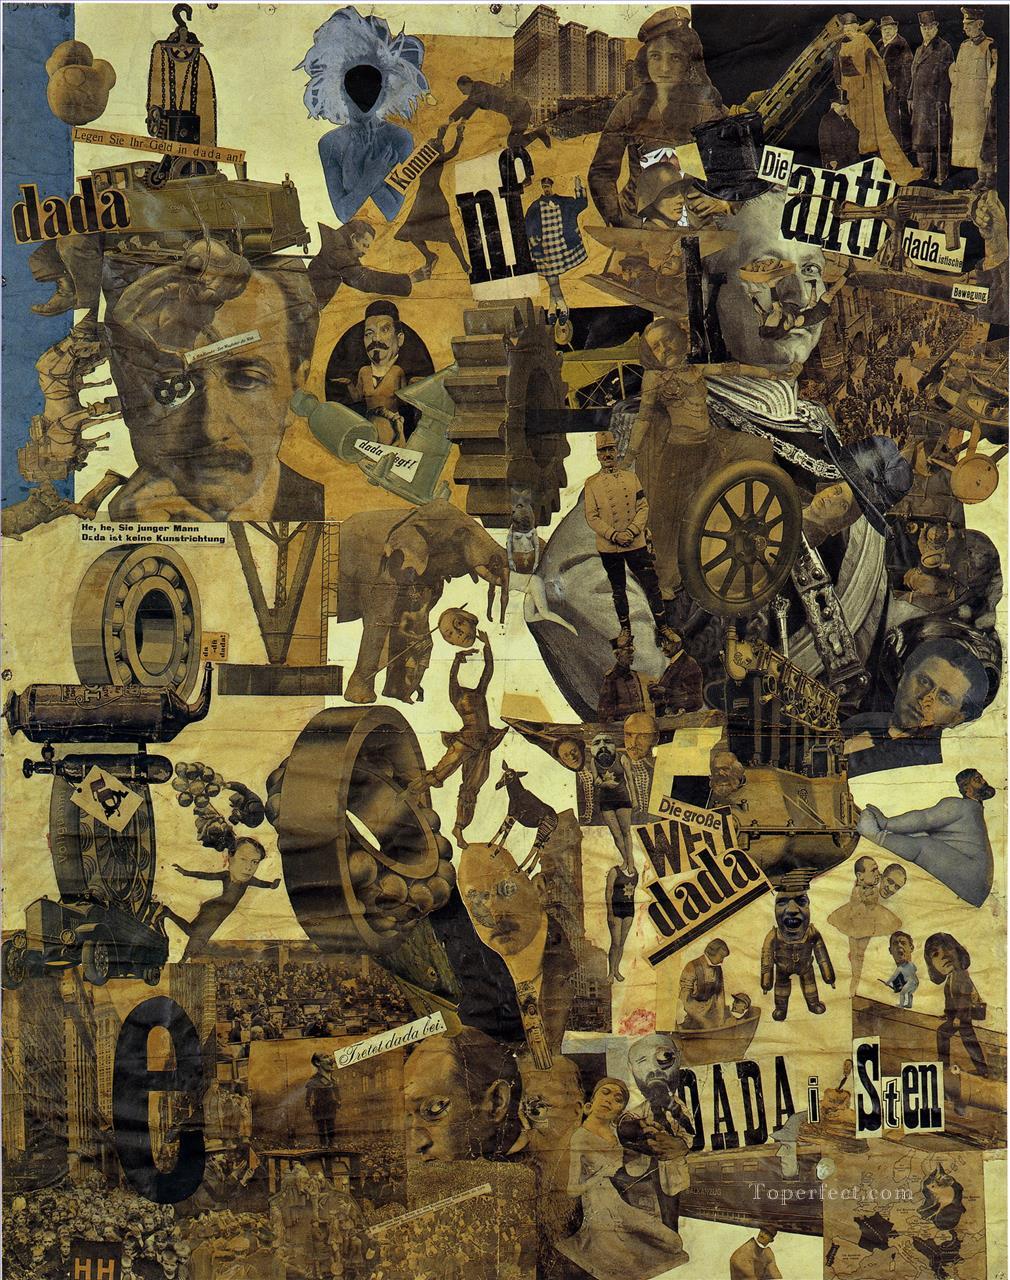 Hannah Höch: Cut with the Kitchen Knife